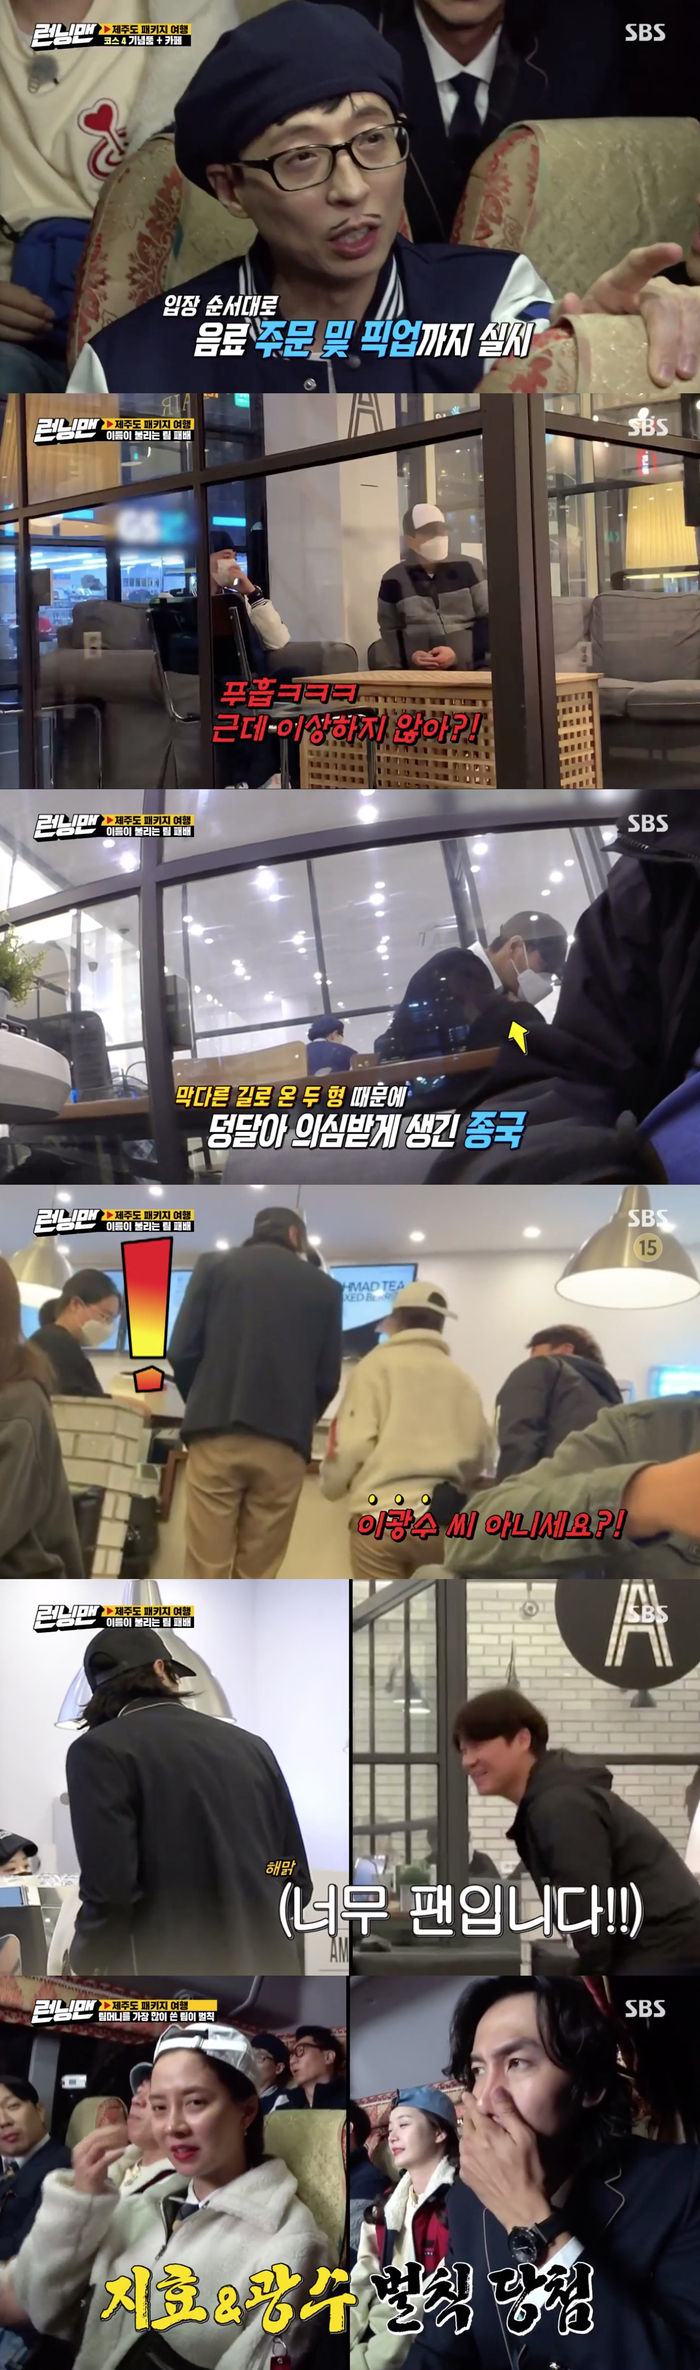 Lee Kwang-soo and Song Ji-hyo finished last.On SBS Running Man broadcasted on the 8th, Jeju Island package Travel Race was conducted.On the day of the show, the members made a package Travel as planned by the production crew, and the expenses spent on Travel should be covered by the last.Prior to the final commission, the production team said, The package is a duty-free shop, but the situation is not enough, so Mr. Somin will stay alone and shop tomorrow. He asked, Is it okay if you give Mr. Somin a penalty exemption? All members agreed happily.And I decided to enjoy HO-KAGO TEA TIME II for the last course ahead of duty-free shop shopping.However, it is not simply enjoying HO-KAGO TEA TIME II, but the four teams should go to the cafe in order and succeed without being caught by people.If the name was first called, the In-N-Out Burger would be in, and if all four teams were in, they would have to go on to order drinks if no one recognized them.The first teams to go in are Baro Lee Kwang-soo and Song Ji-hyo.Members were convinced that the light is caught unconditionally; this is going to take Mask Baro.However, unlike everyones concerns, Lee Kwang-soo and Song Ji-hyo succeeded in sitting safely.Kim Jong-kook and Haha also entered the cafe safely, and Ji Suk-jin and Yoo Jae-Suk came into the cafe for the third time.They went into a smoking room, which was so bright and full of people, and was struggling to understand what to do.Finally, Yang Se-chan and Jeon So-min came in; the two settled down one to avoid doubt and one ordered a drink.Jeon So-min ordered a drink and was anxious that Identity might be caught, but after safely ordering the drink, Yang Se-chan came and sat down where he was settled.At this time, Lee Kwang-soo and Song Ji-hyo told the cafe employee that they should order drinks.Lee Kwang-soo and Song Ji-hyo headed to the counter to order drinks in anxiety, but some of the cafe guests found them strange.And a guest came up to them and said, Are you not Lee Kwang-soo? Is that Song Ji-hyo?, and Lee Kwang-soo and Song Ji-hyo were In-N-Out Burger.The rest of the members were delighted and headed to the bus for the news of Lee Kwang-soos In-N-Out Burger.Yoo Jae-Suk told the members, I do not know, but it is all strange. Lee Kwang-soo said, Jae Seok tried to report to the police when his brother and Seokjin came in.I won so much, he said, laughing.Meanwhile, the race final winner was Yoo Jae-Suk, who collected the most stamps, and the second place went to Ji Suk-jin, Yang Se-chan and Kim Jong-kook.Lee Kwang-soo and Song Ji-hyo were selected as opening penalties by holding the lowest team money with team money of -12122,000 won.